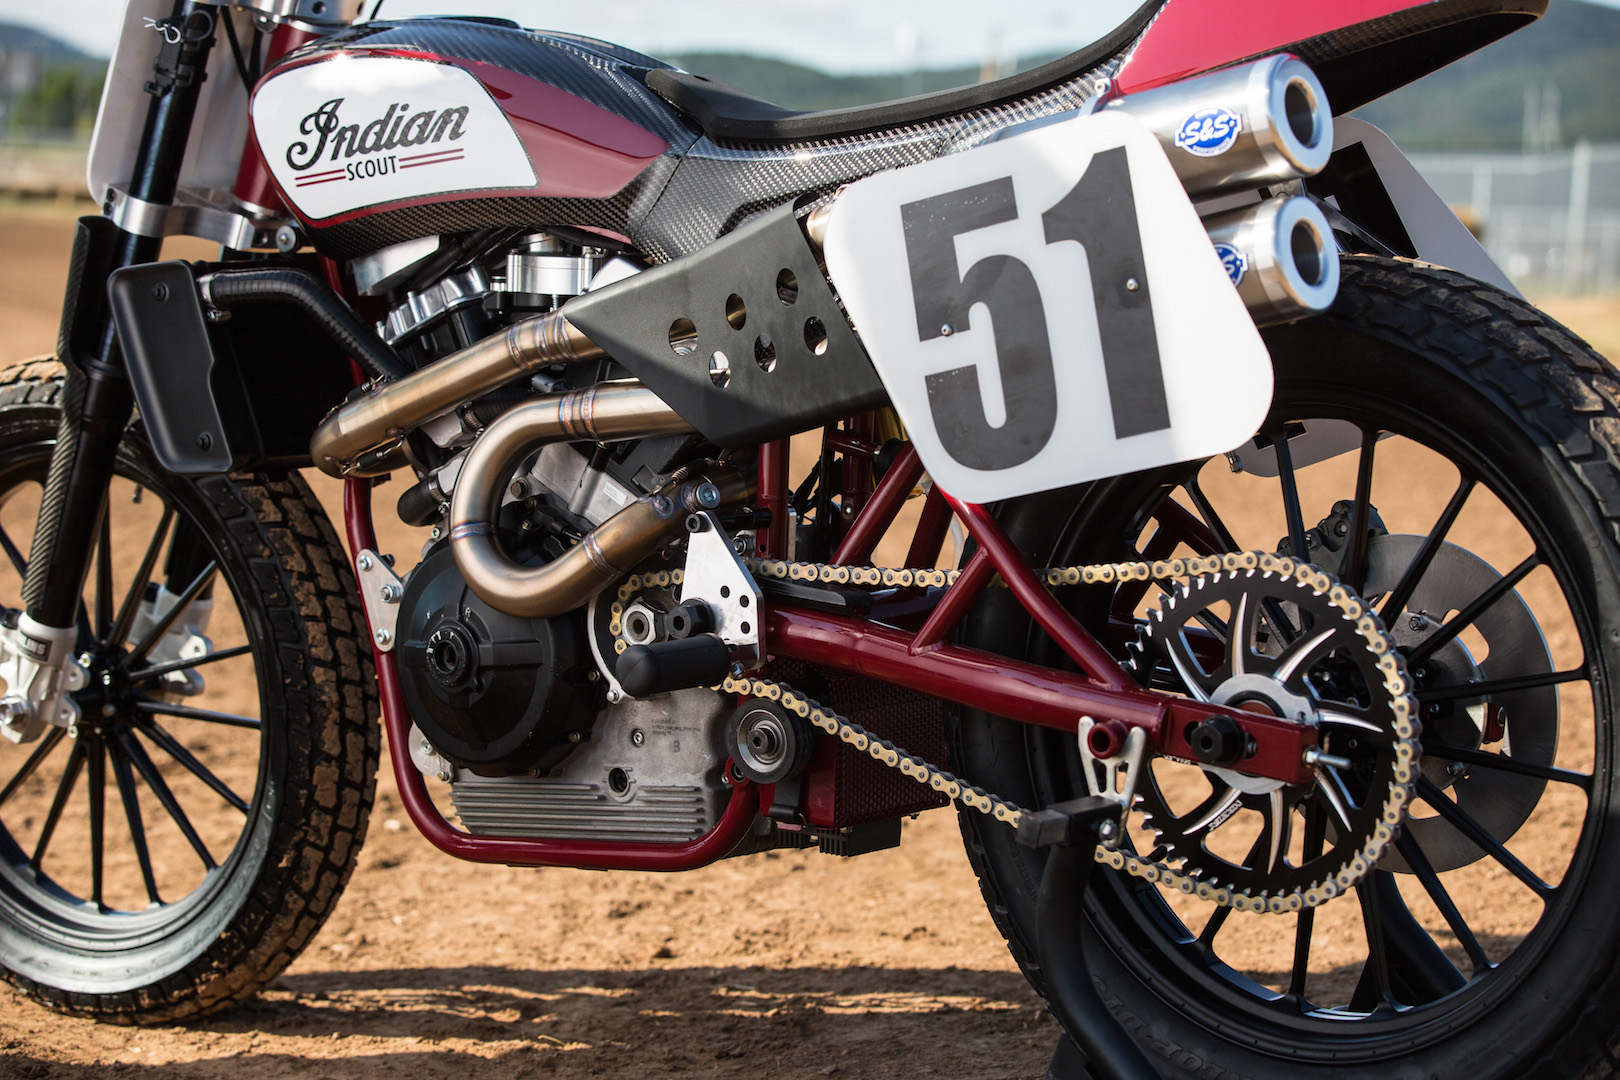 The all-new Indian Scout FTR750 flat track race bike.